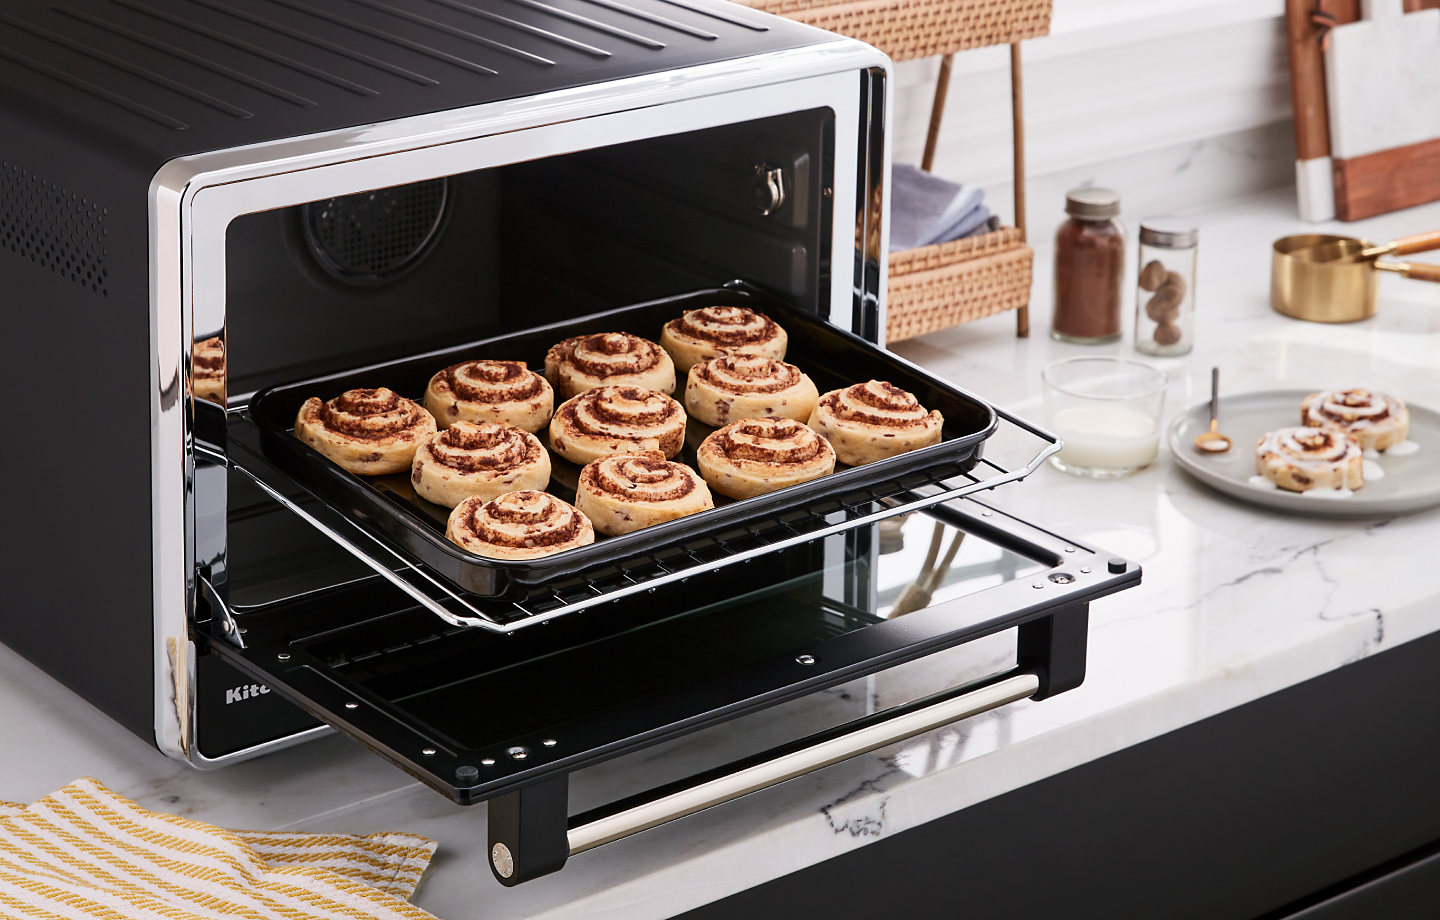 Toaster Ovens vs Countertop Ovens: What's the difference?